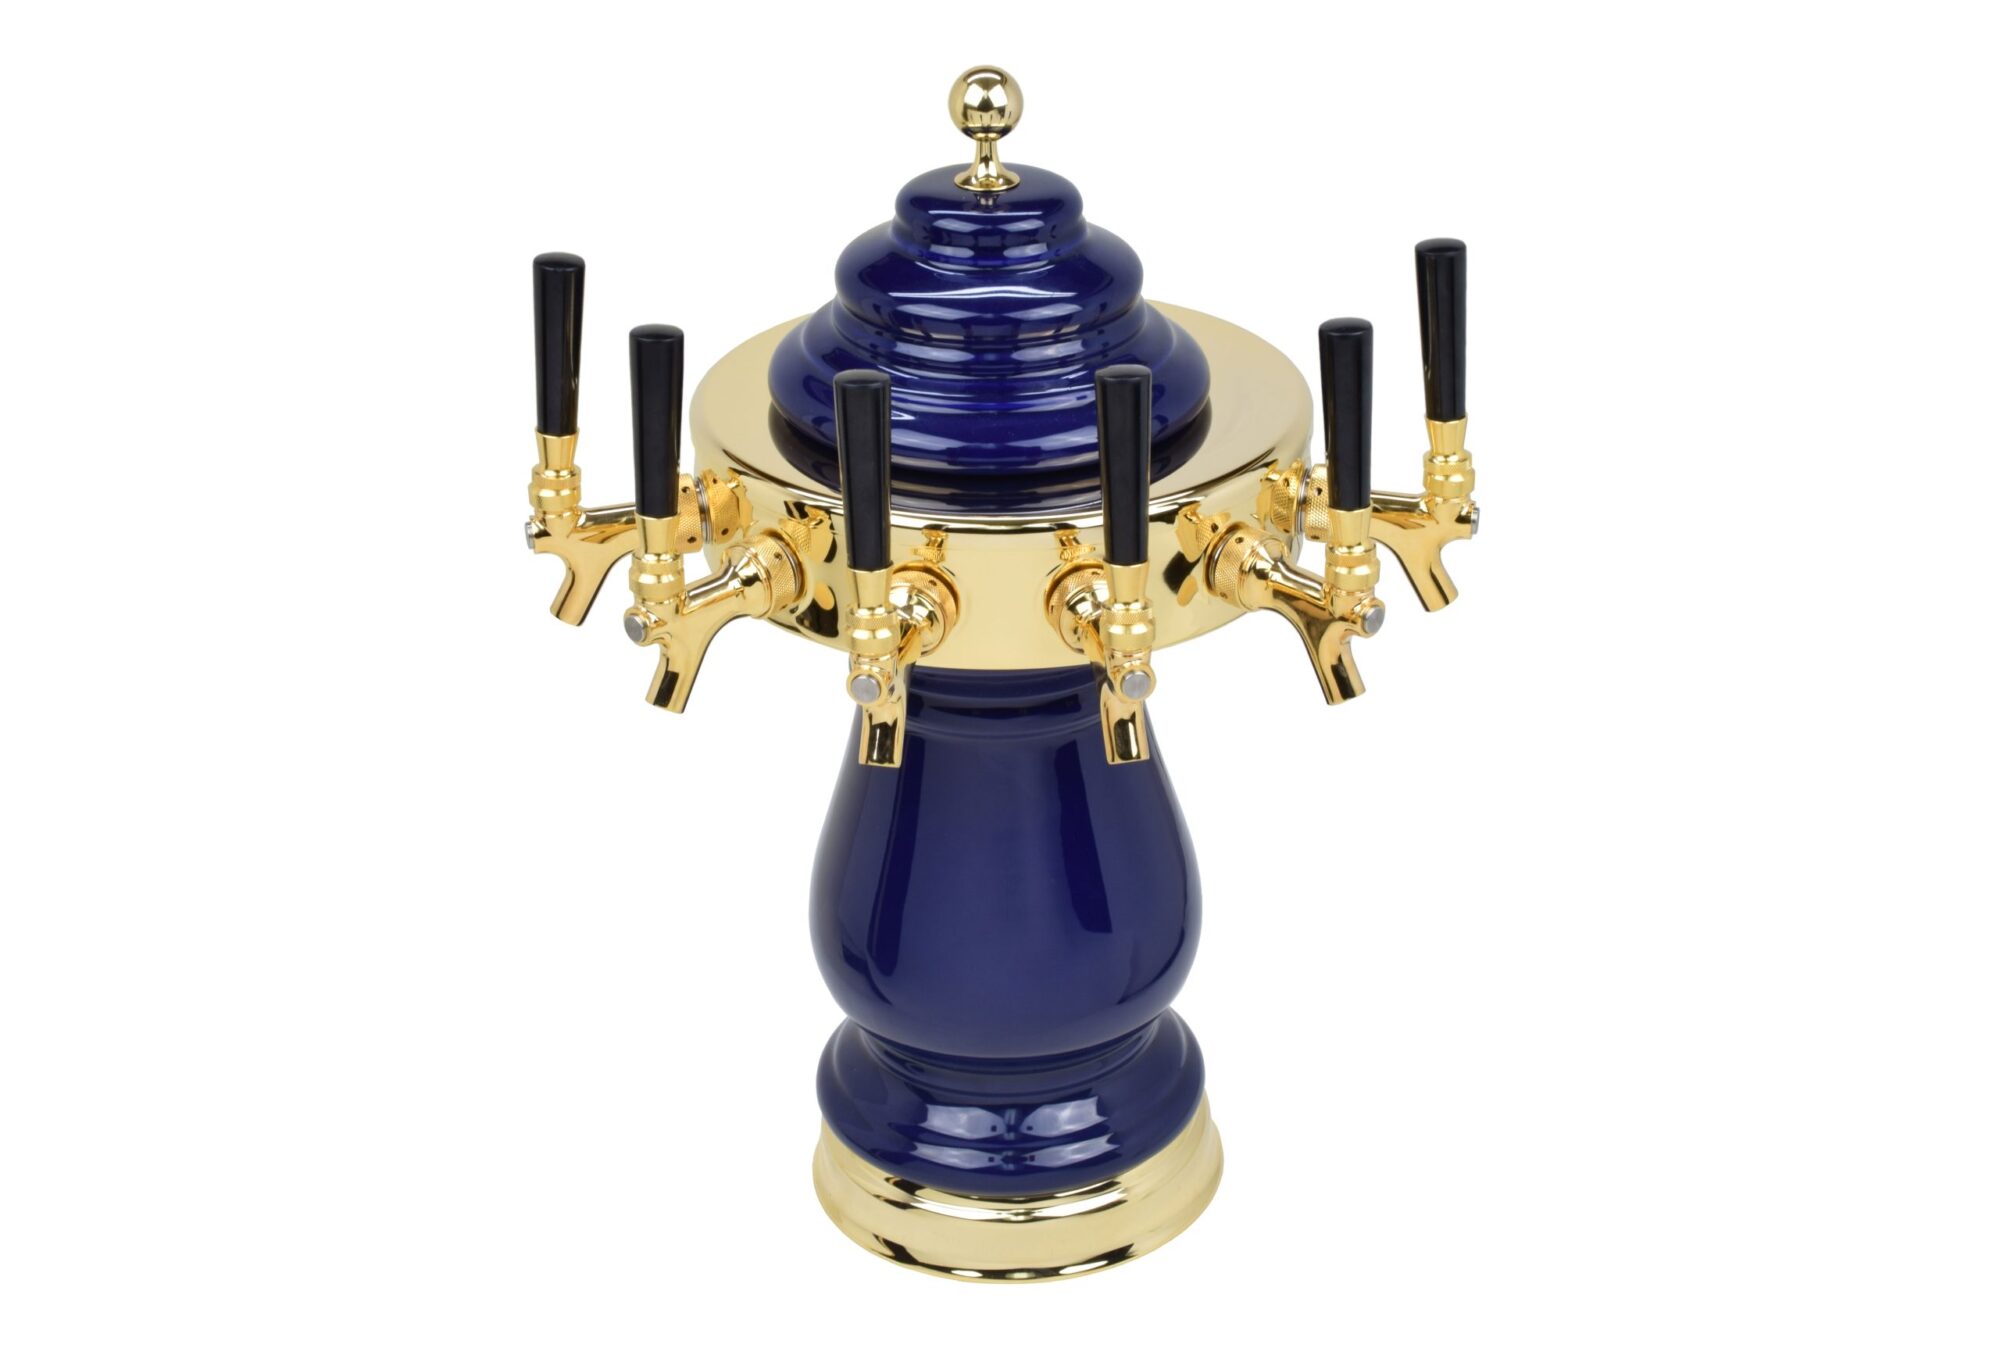 884B-6BL Six Faucet Ceramic Tower with PVD Gold Hardware and Faucets - Shown in Cobalt Blue